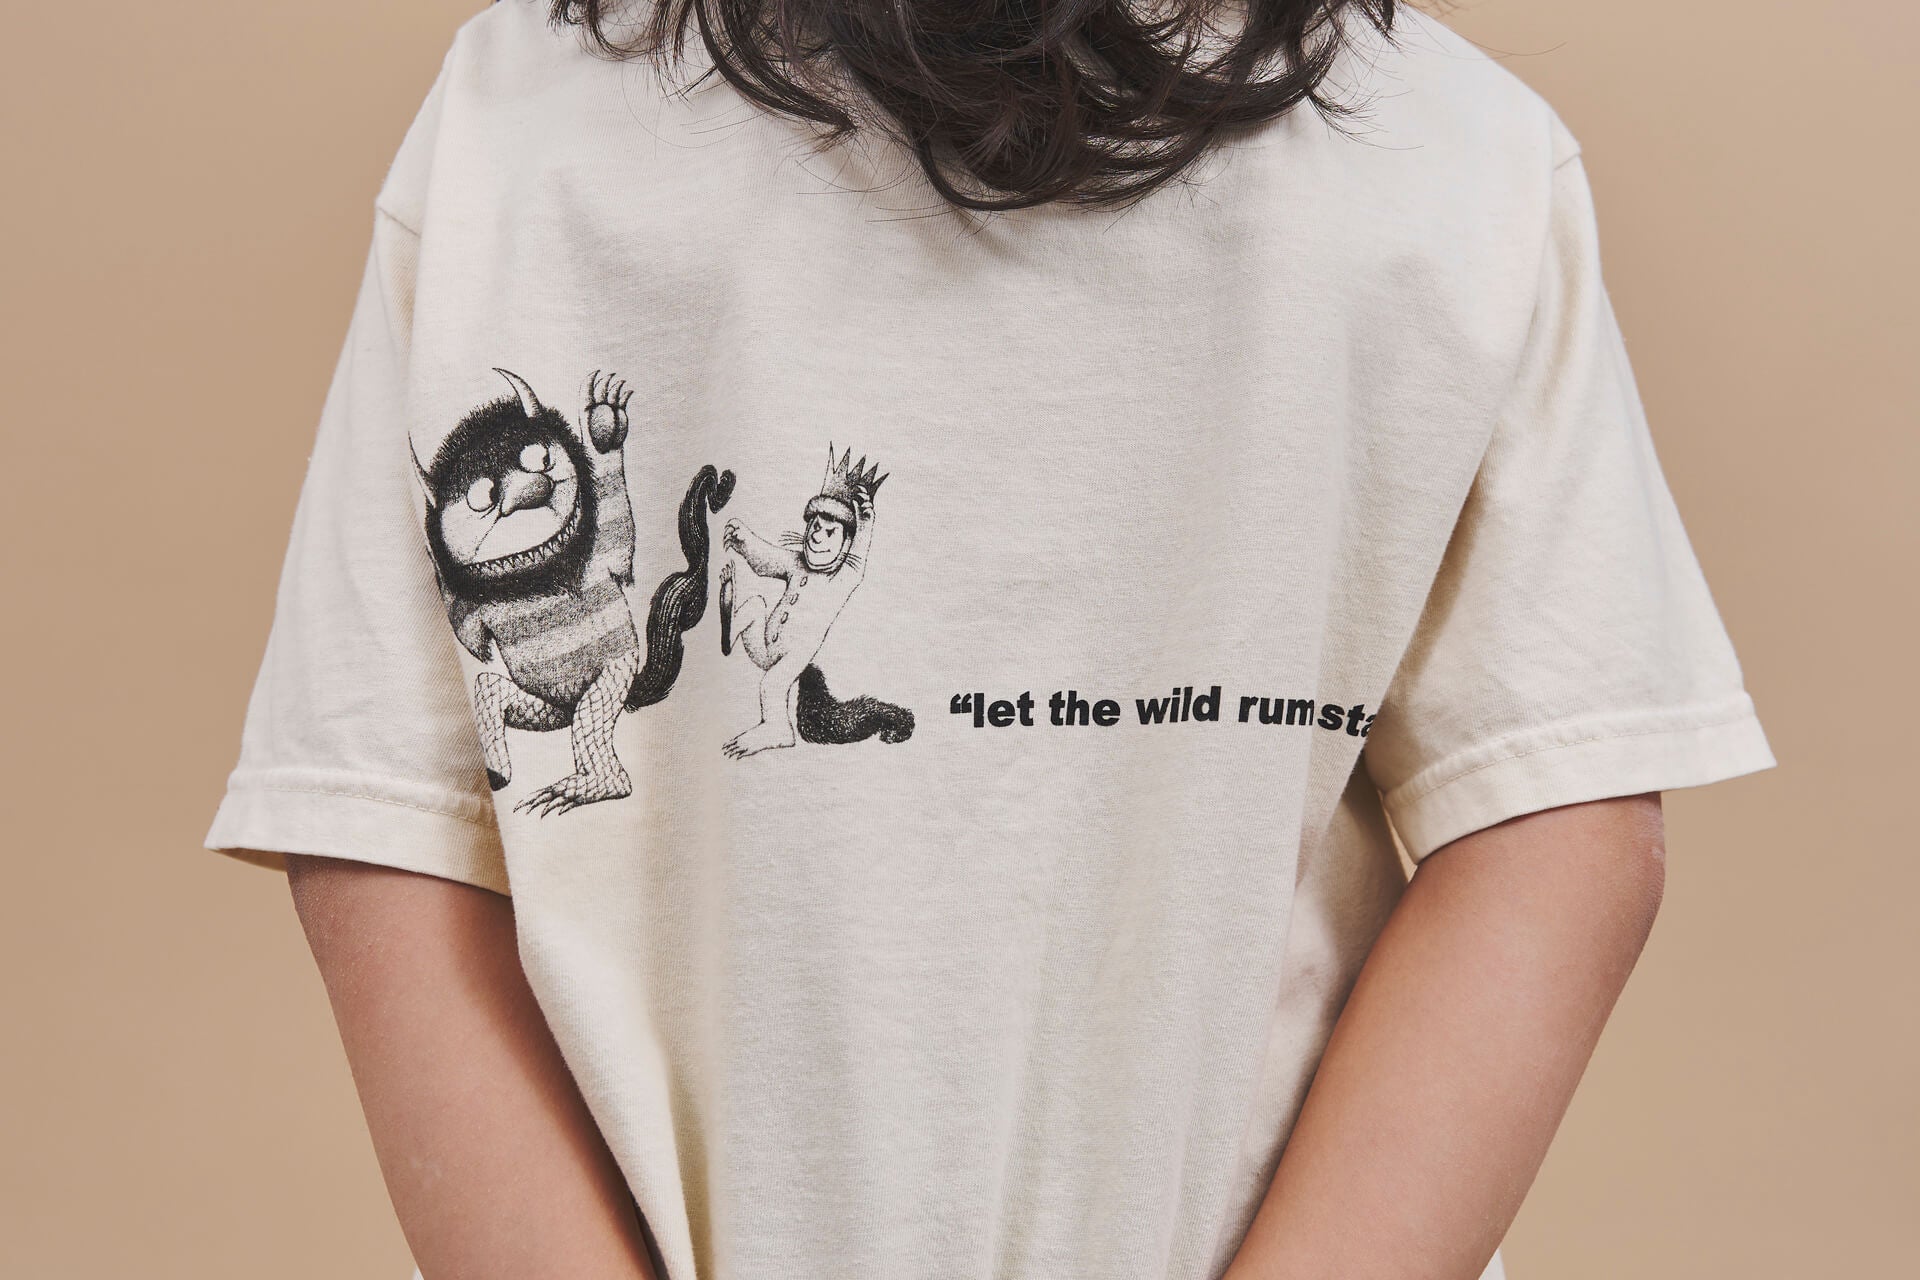 BAIT x WHERE THE WILD THINGS ARE